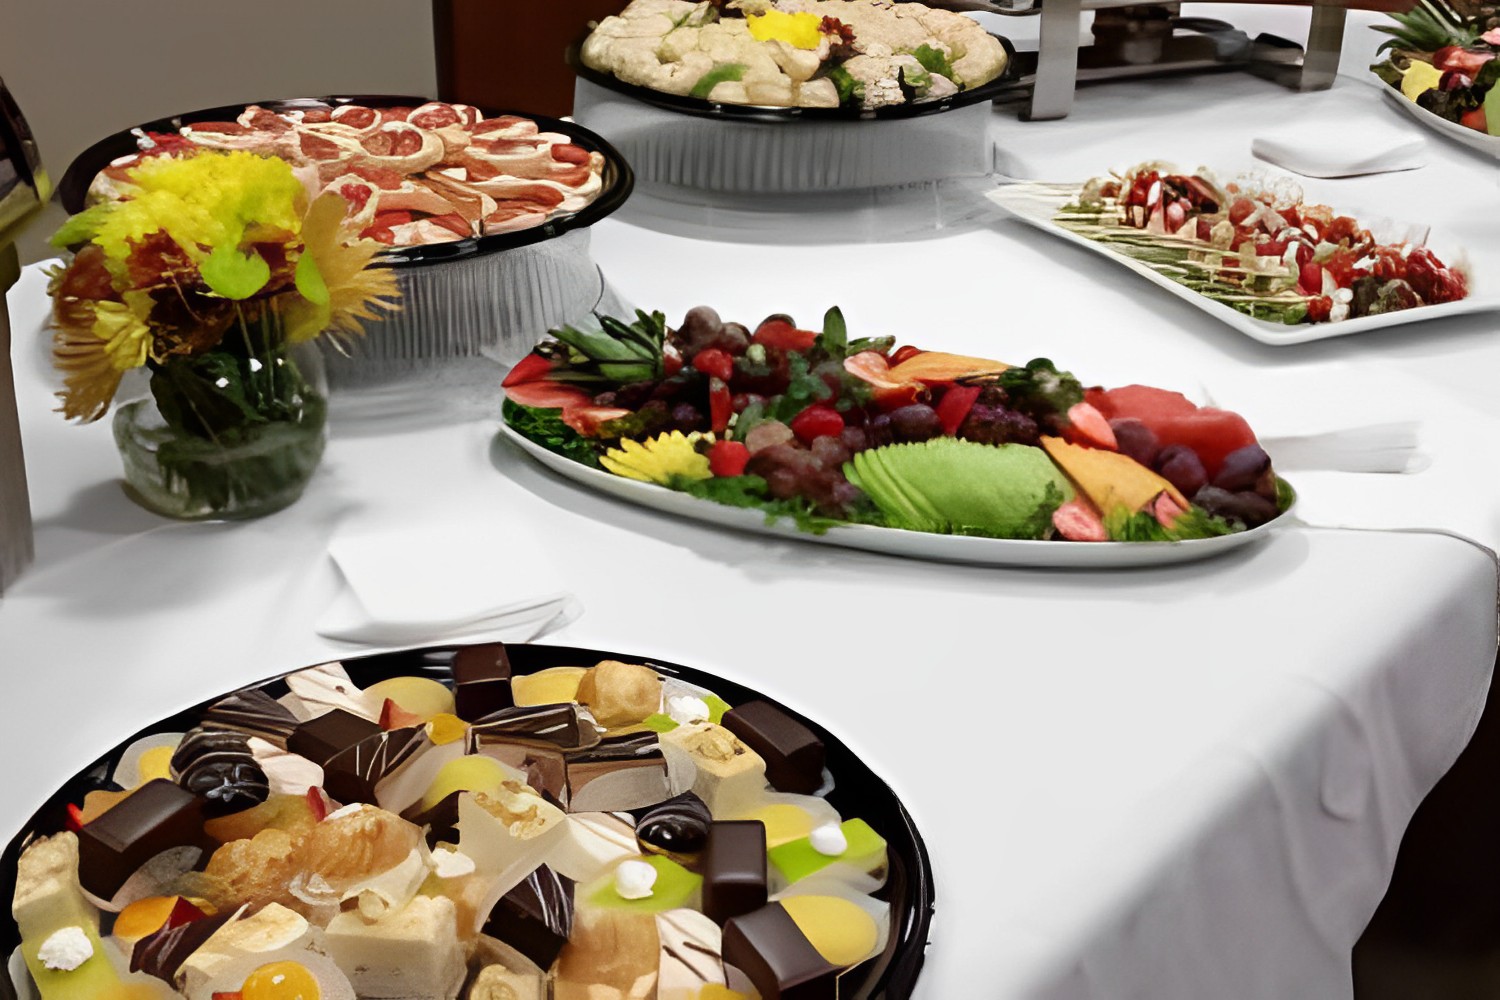 The Benefits of Working with a Professional Catering Company